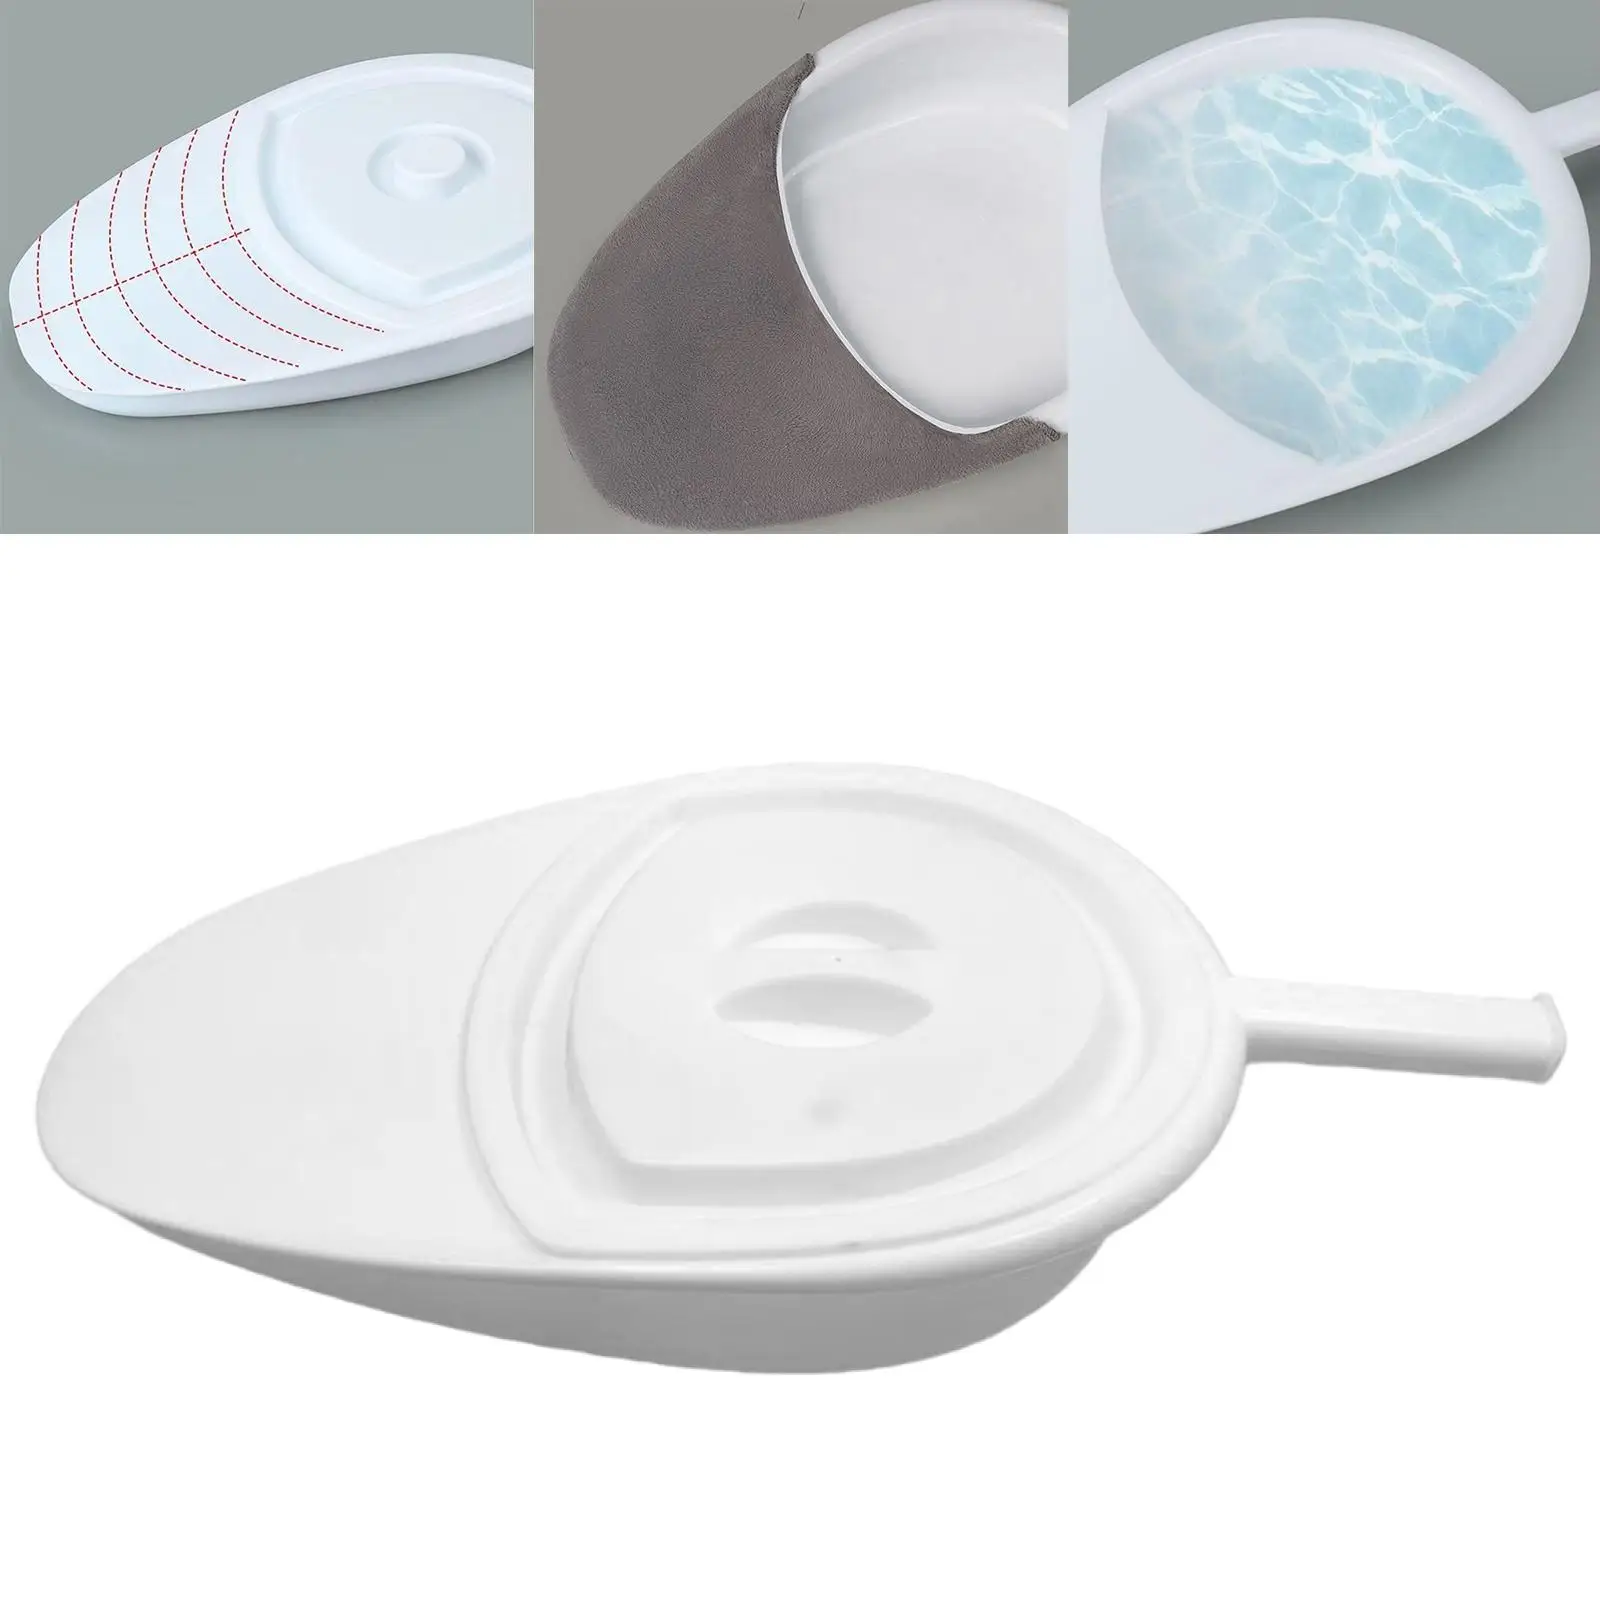 Portable Bedpan Urinal Potty Durable Firm Thick Load Bearing Bed Pan for Elderly Home Use